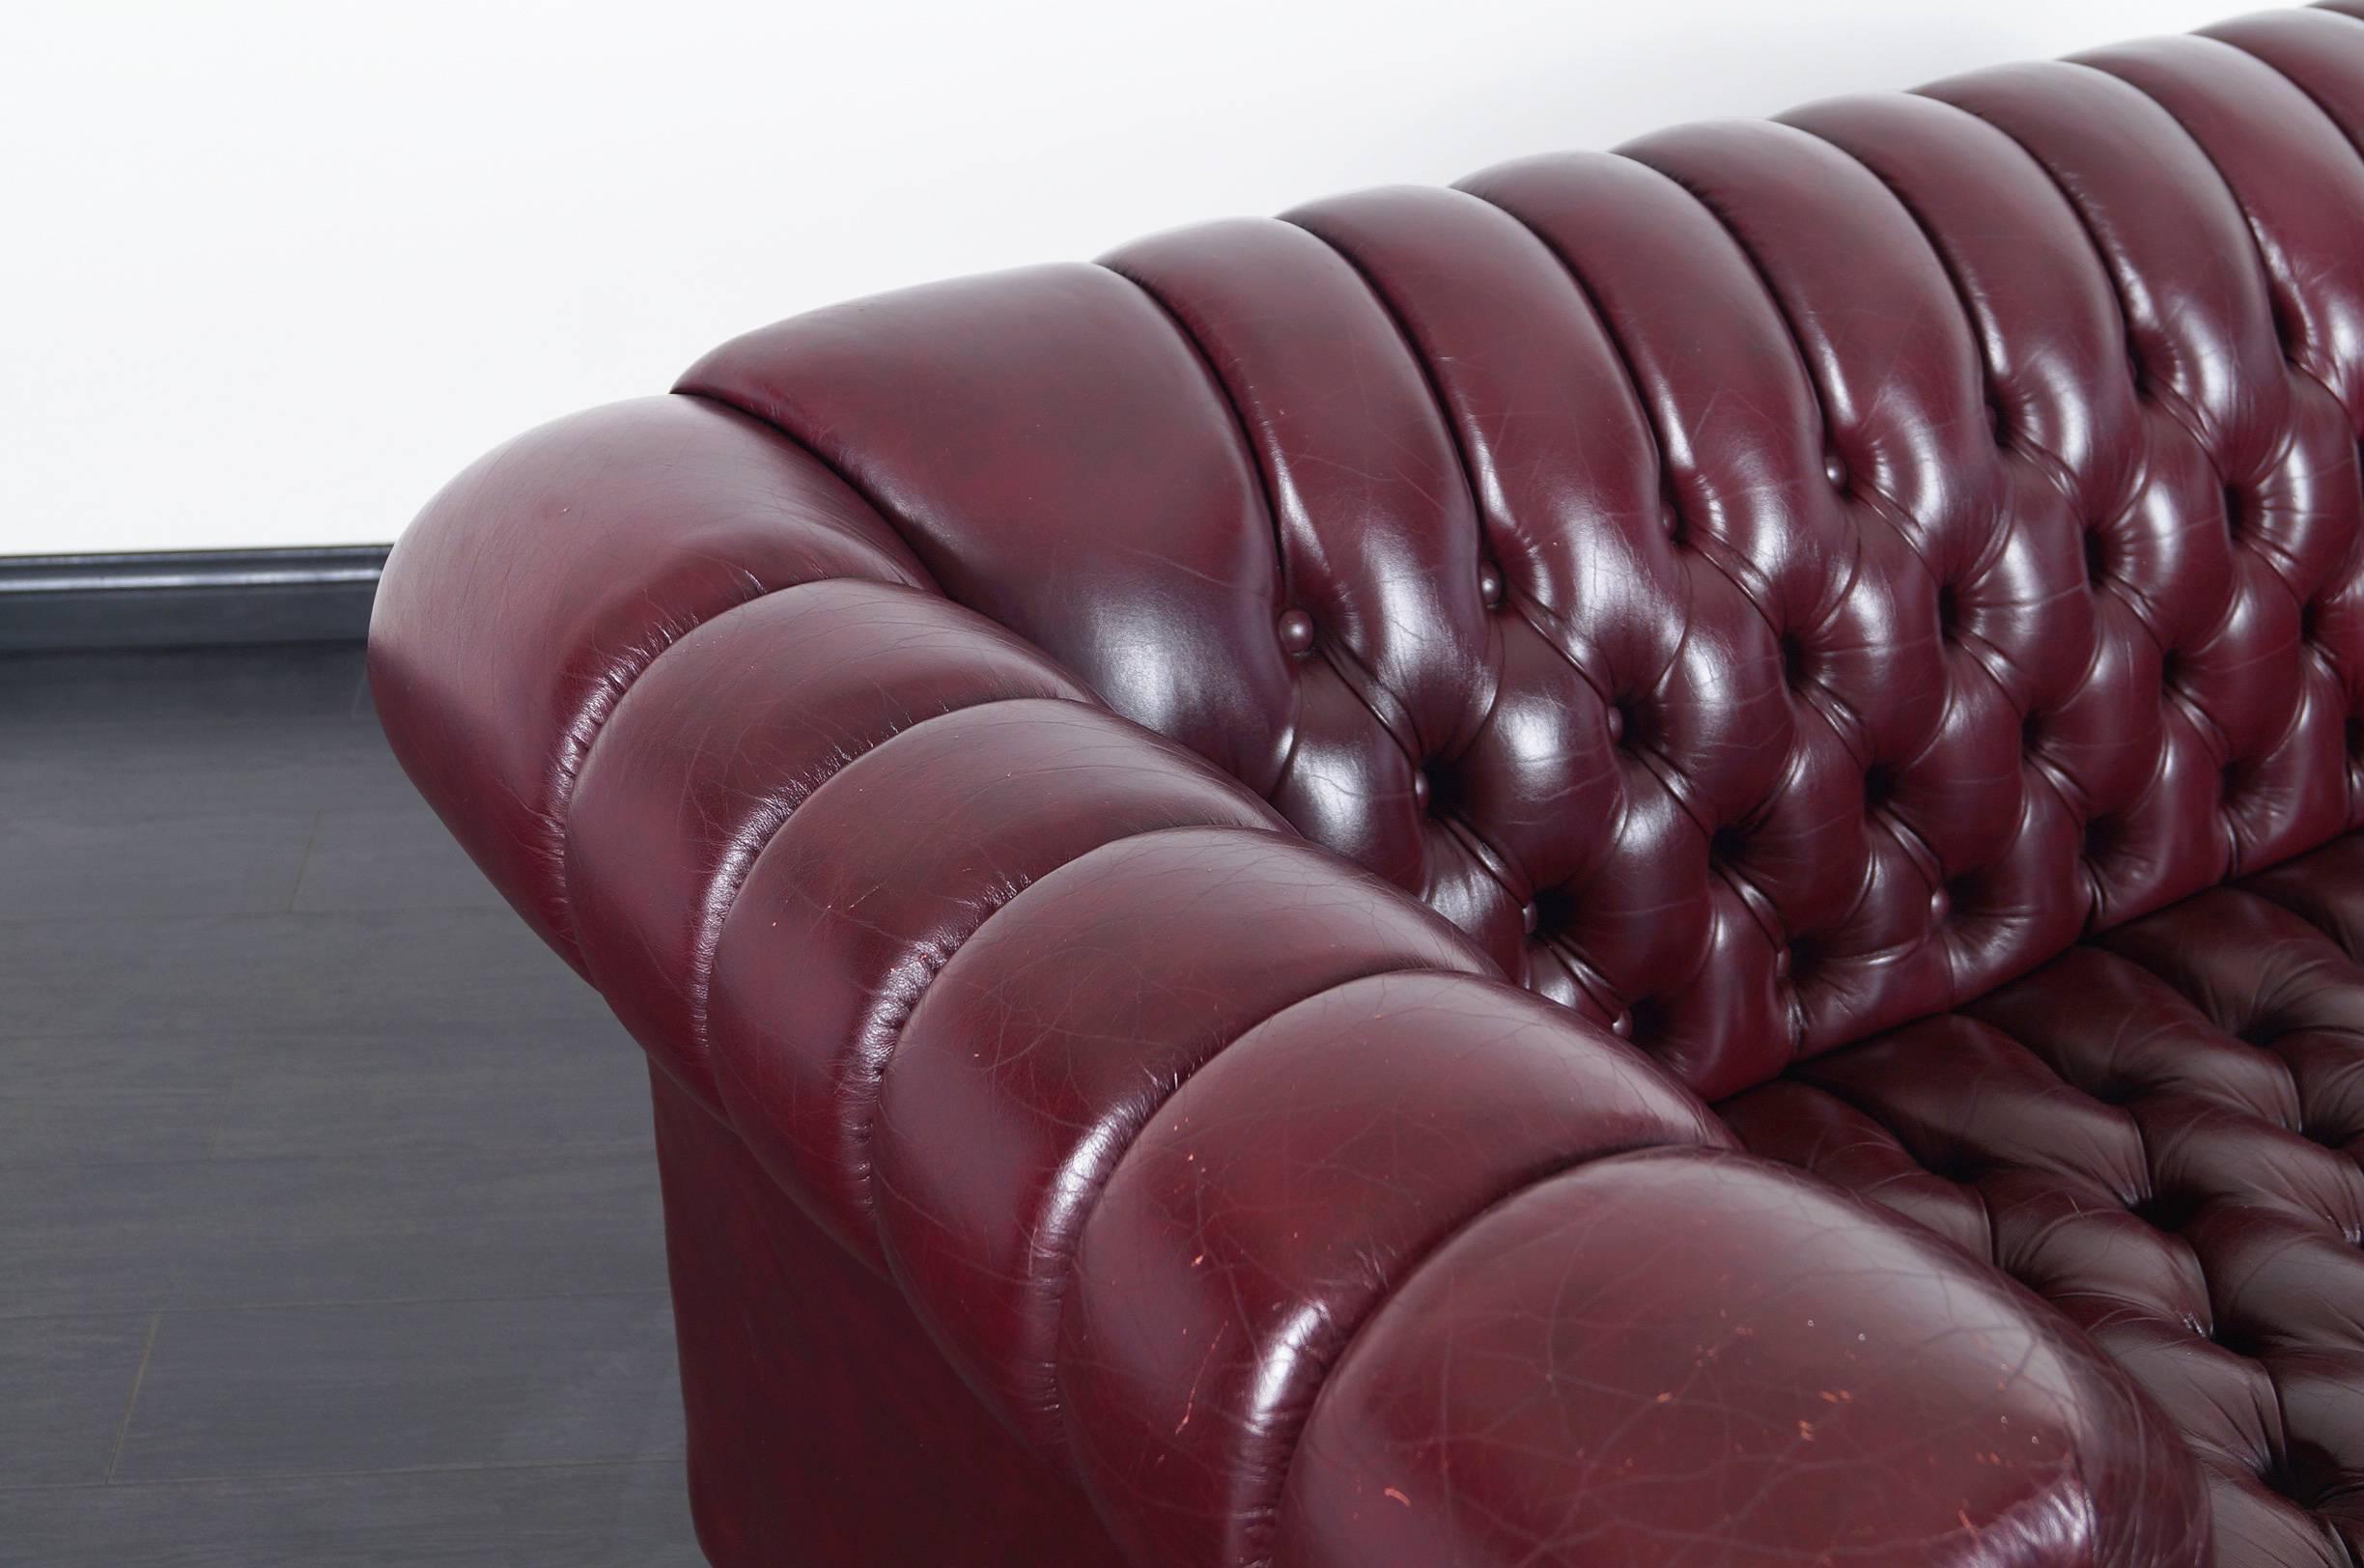 chesterfield love seat